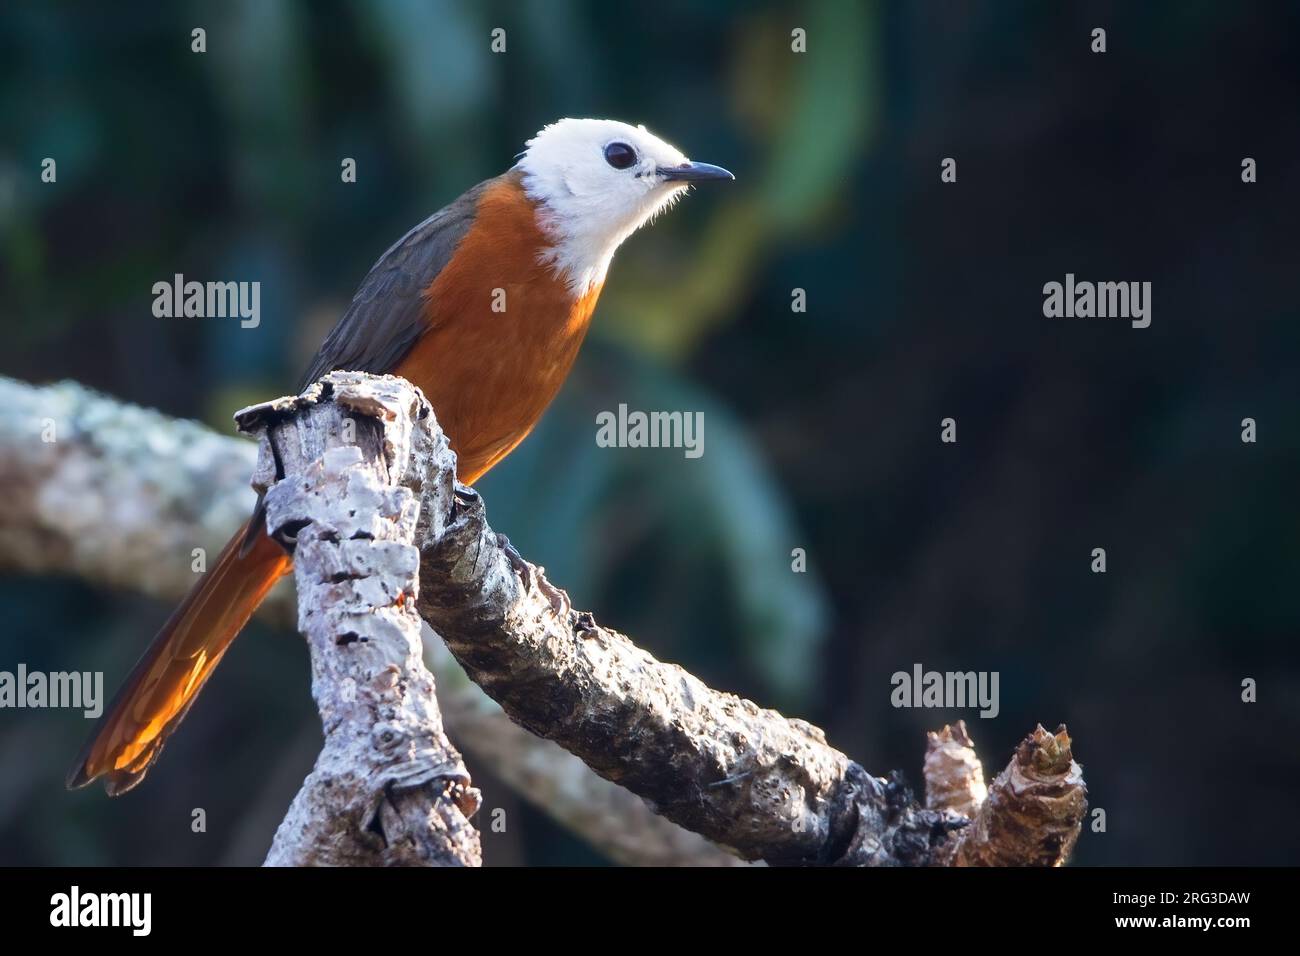 White-headed Robin-Chat (Cossypha heinrichi) perched on a branch in Angola. Stock Photo